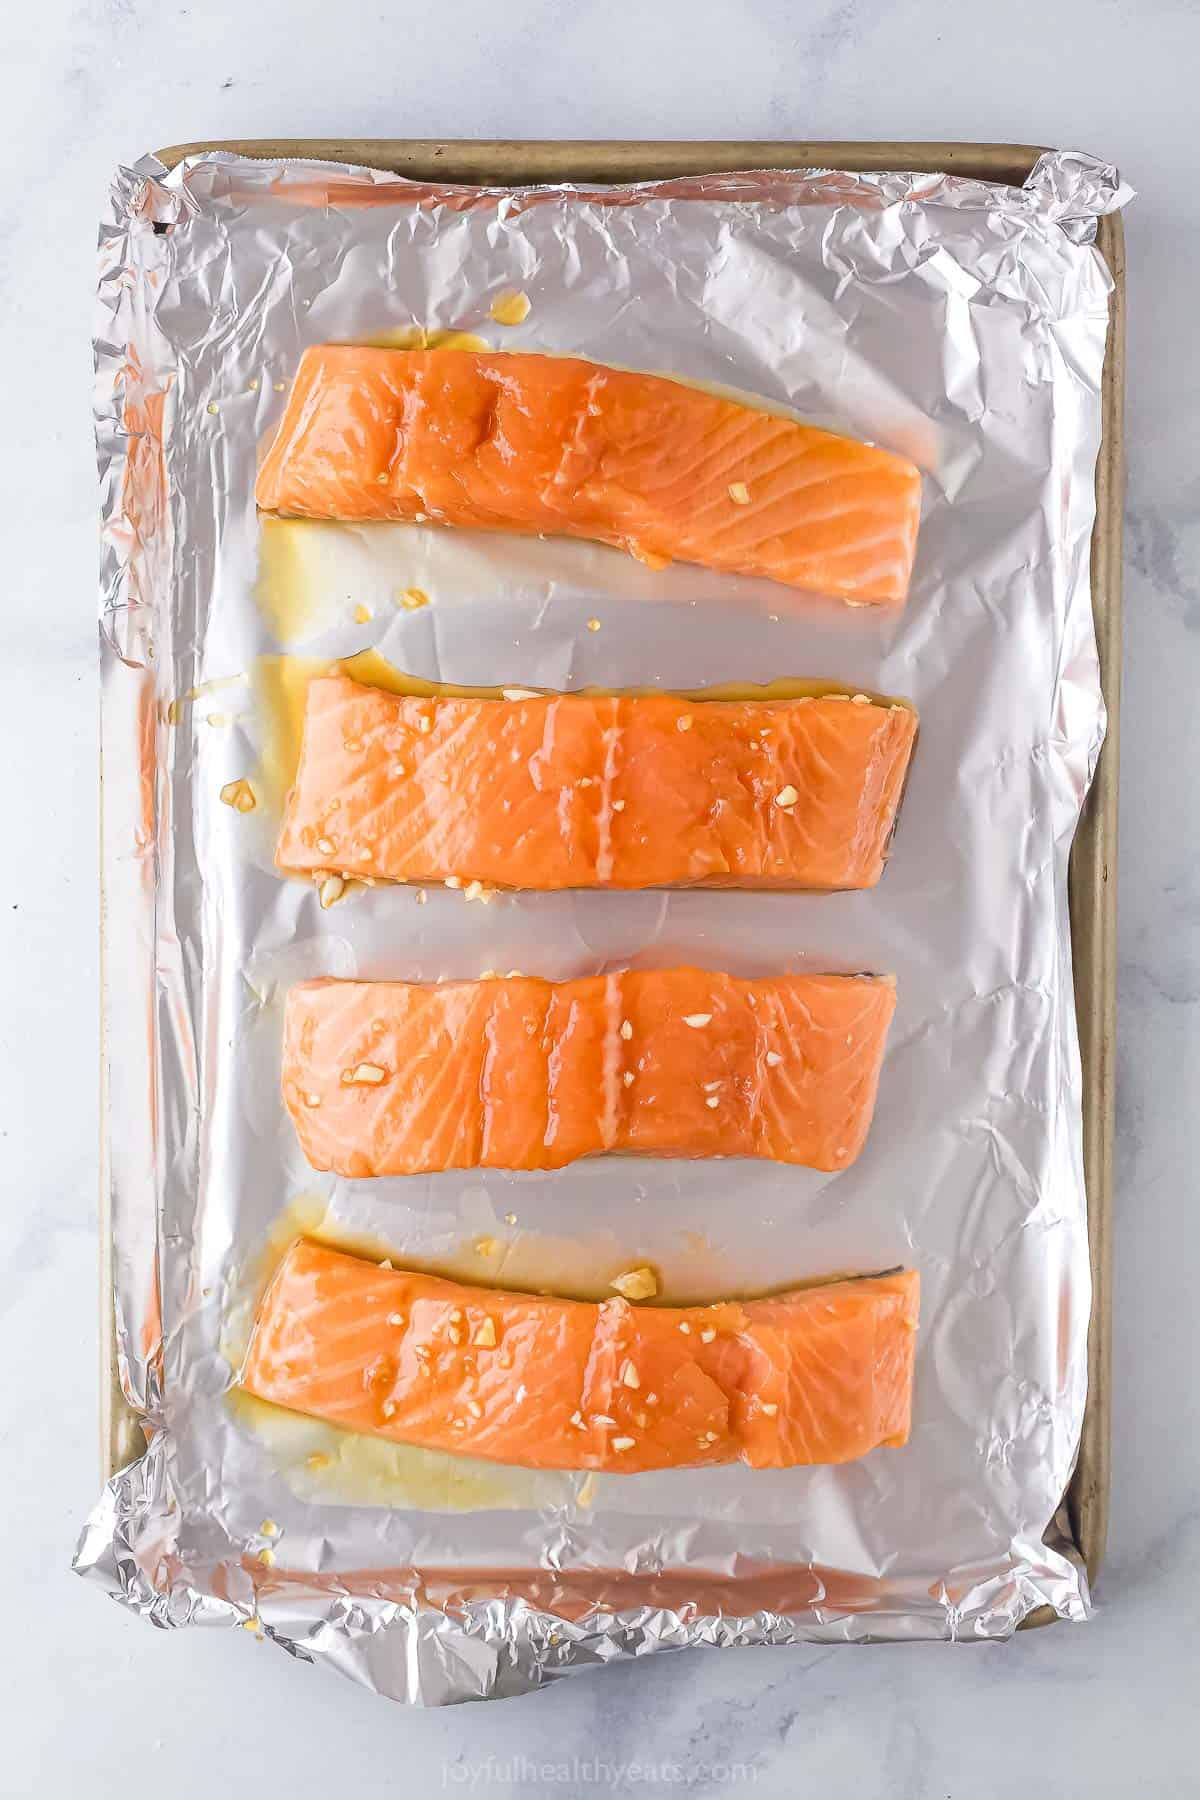 Placing the marinated salmon on the baking sheet. 